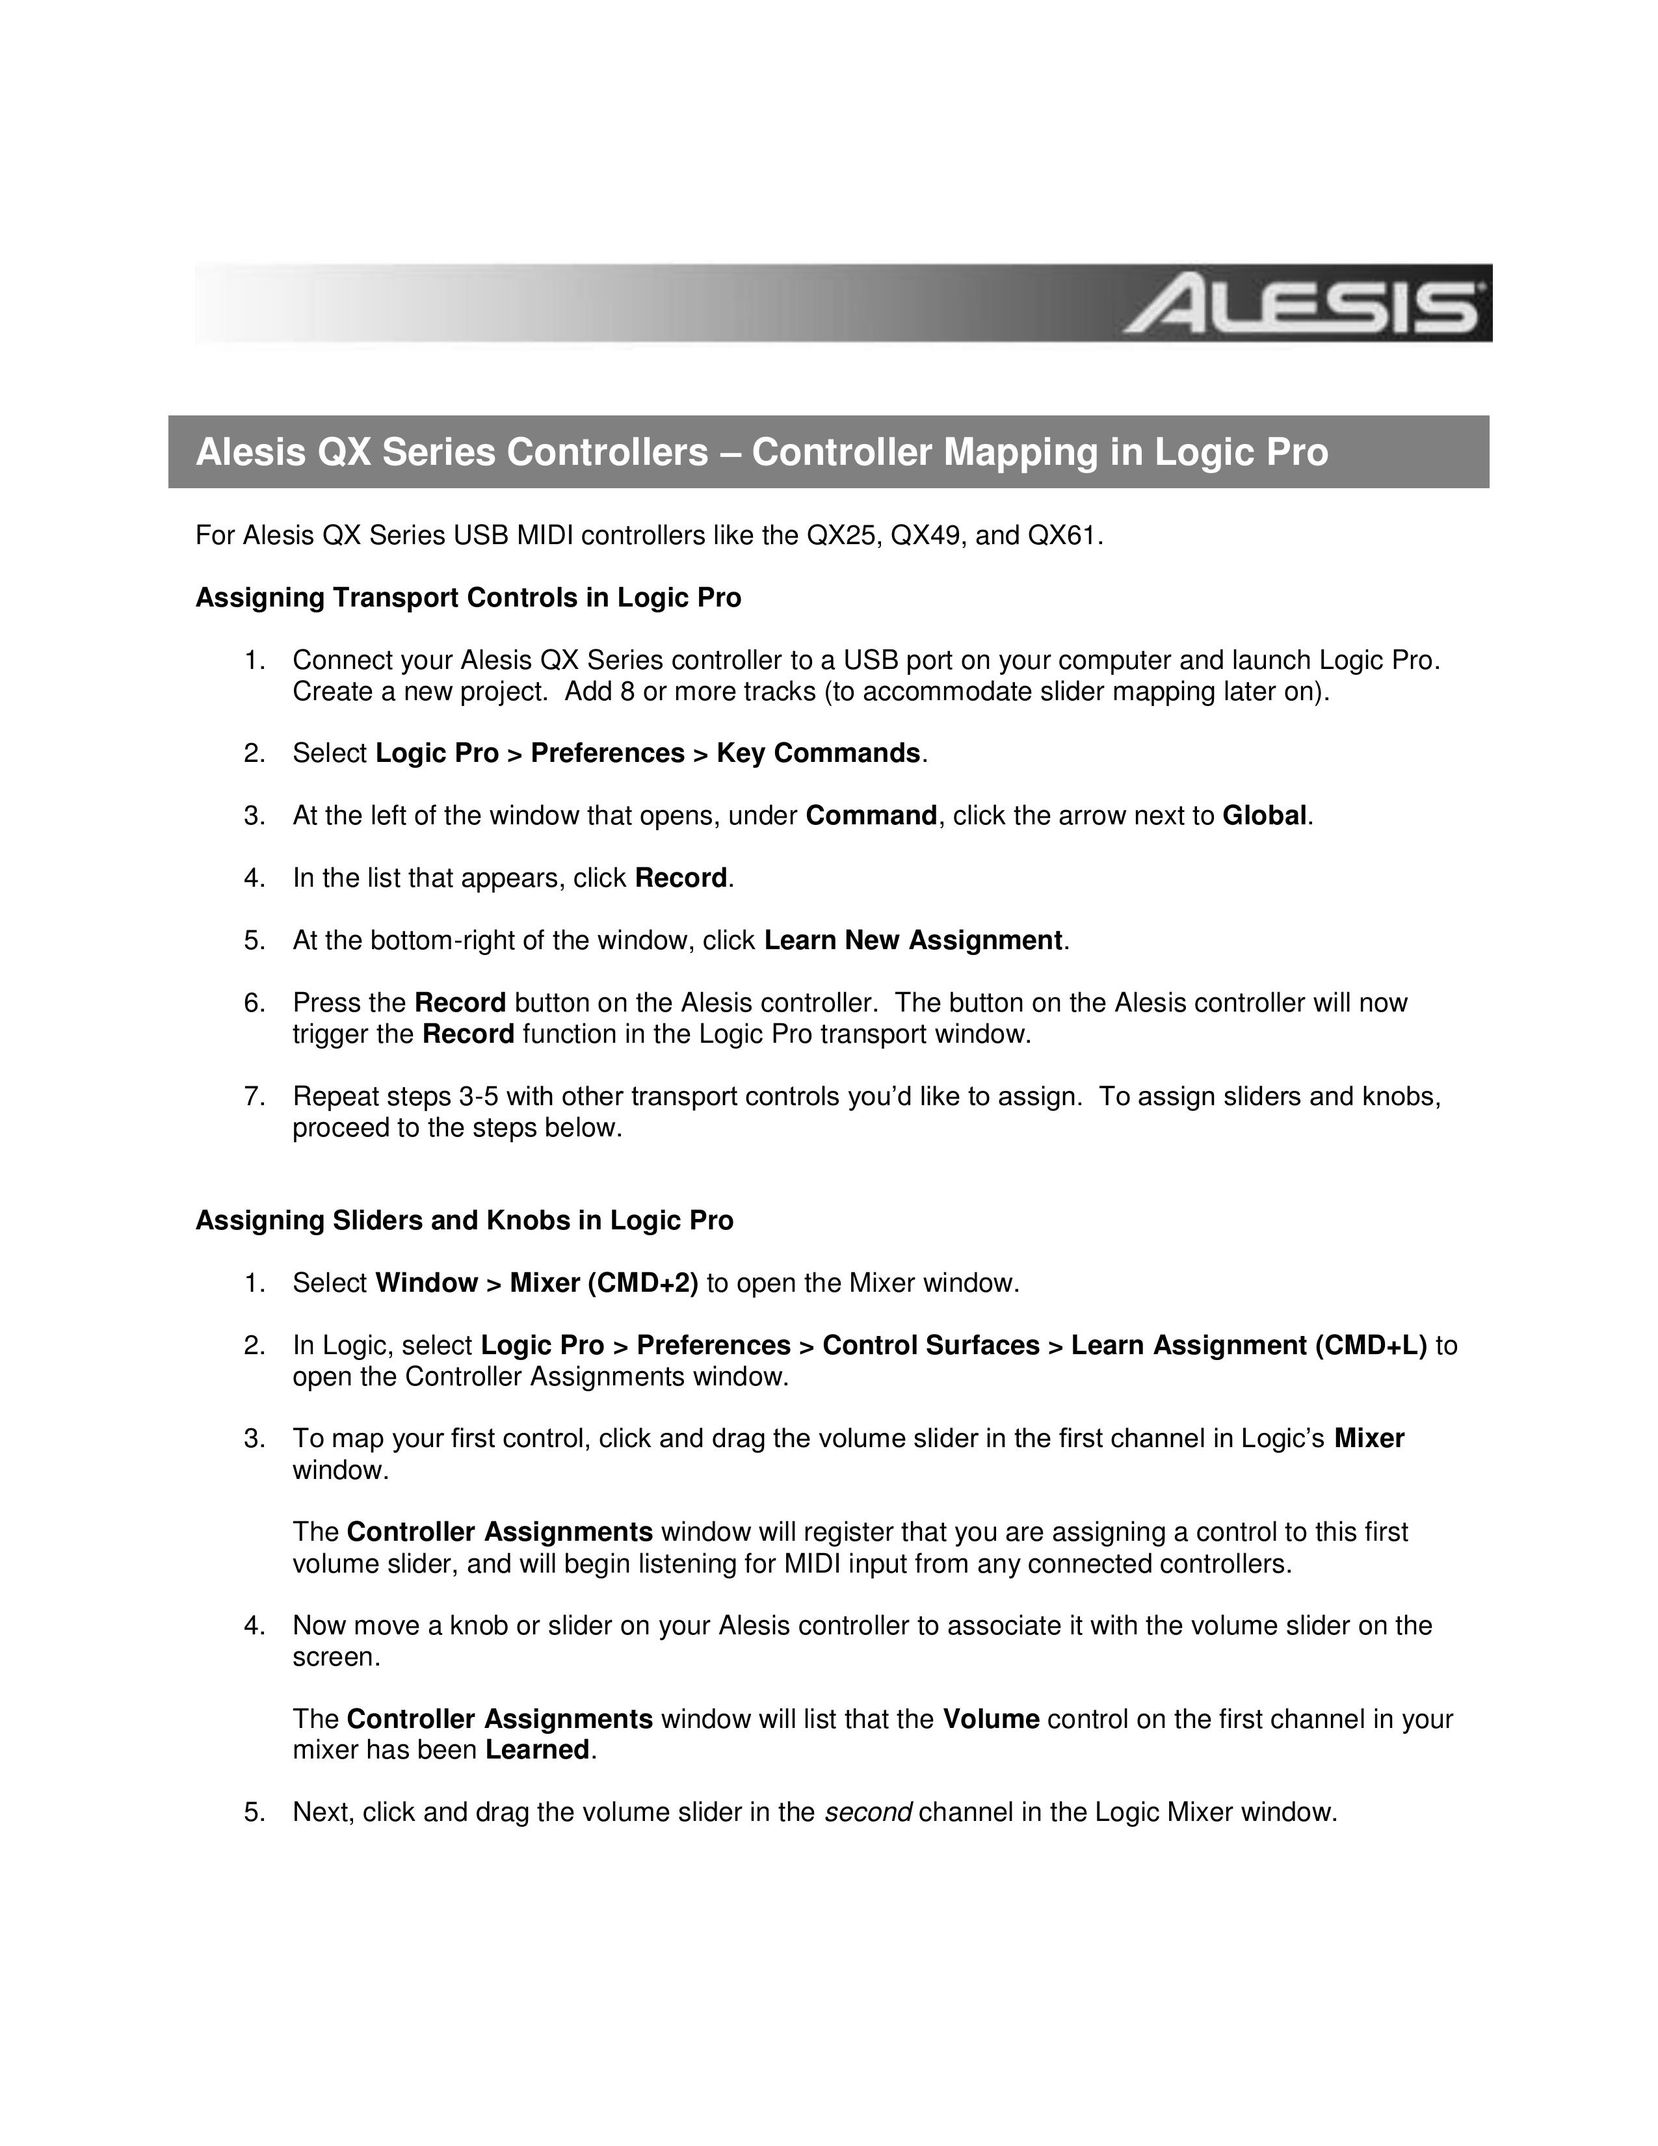 Alesis QX25 Home Theater Server User Manual